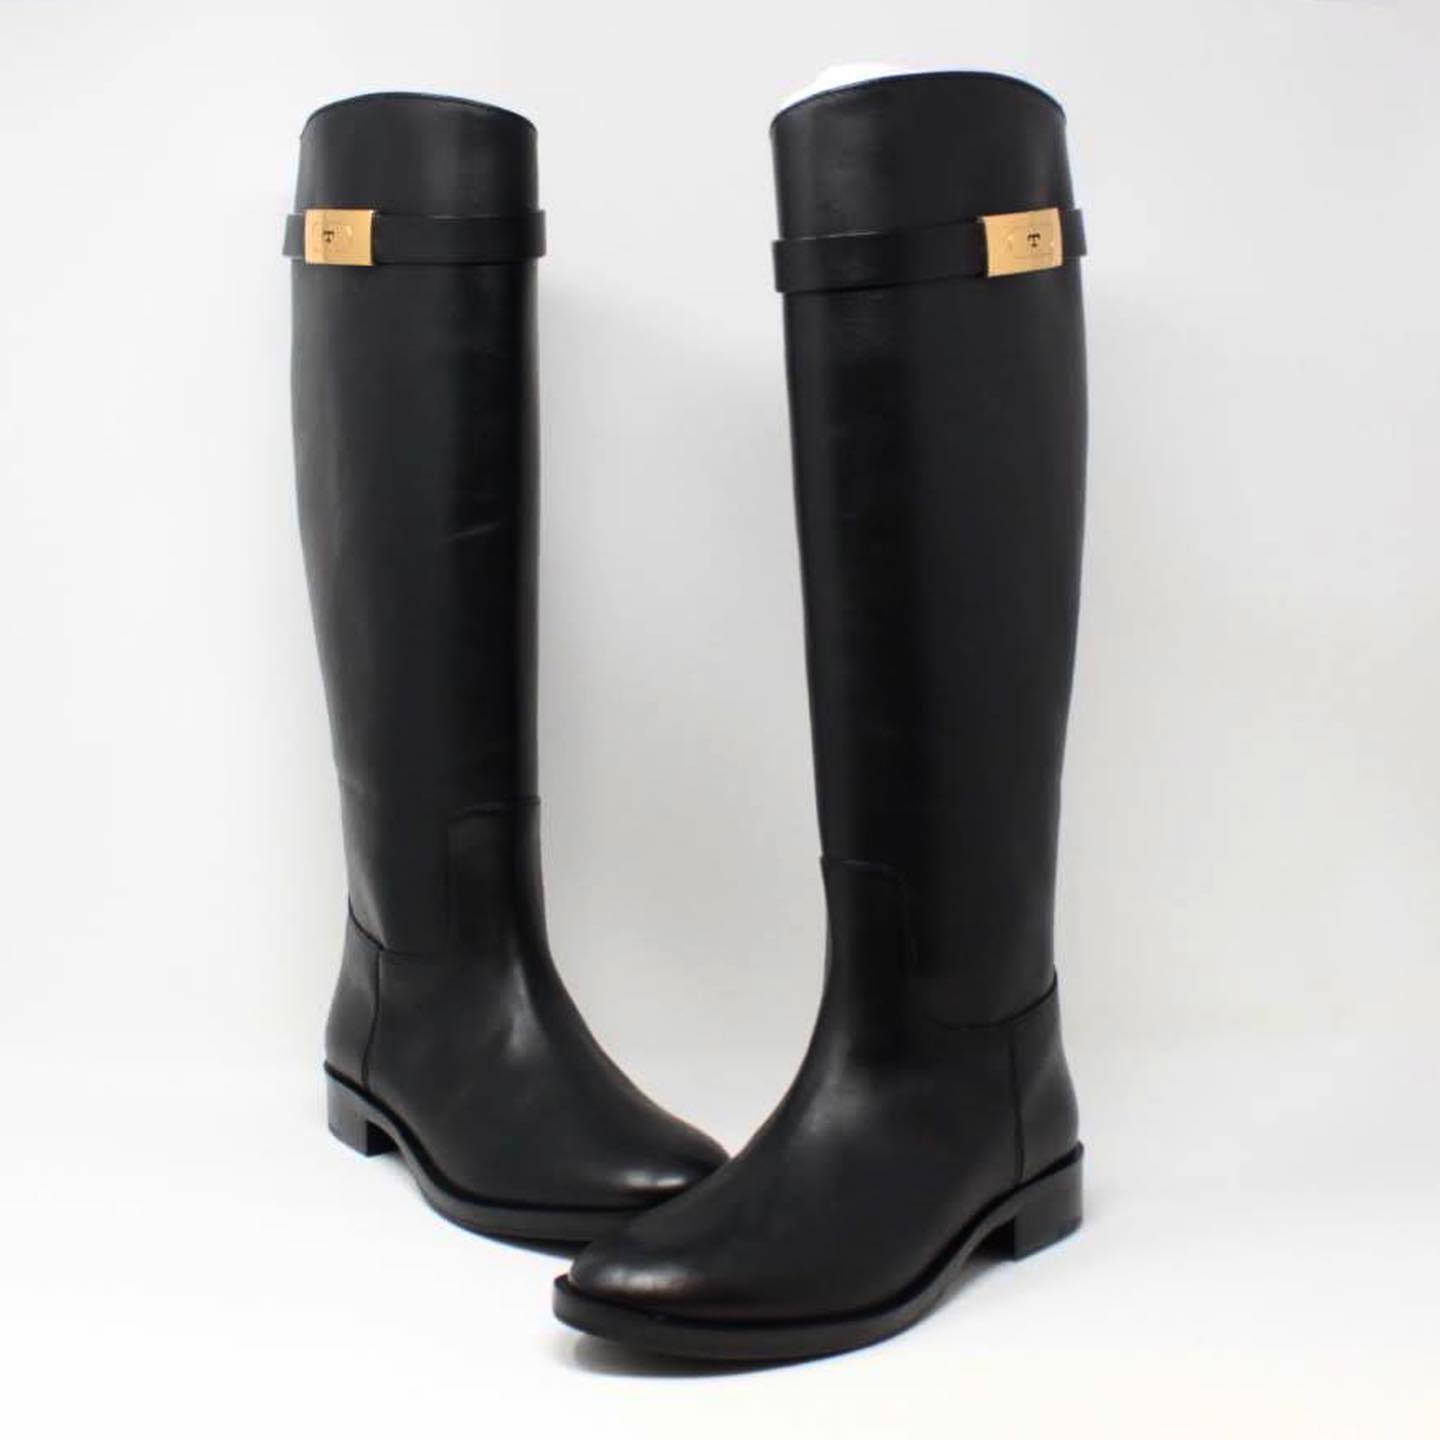 Arriba 80+ imagen tory burch black leather riding boots